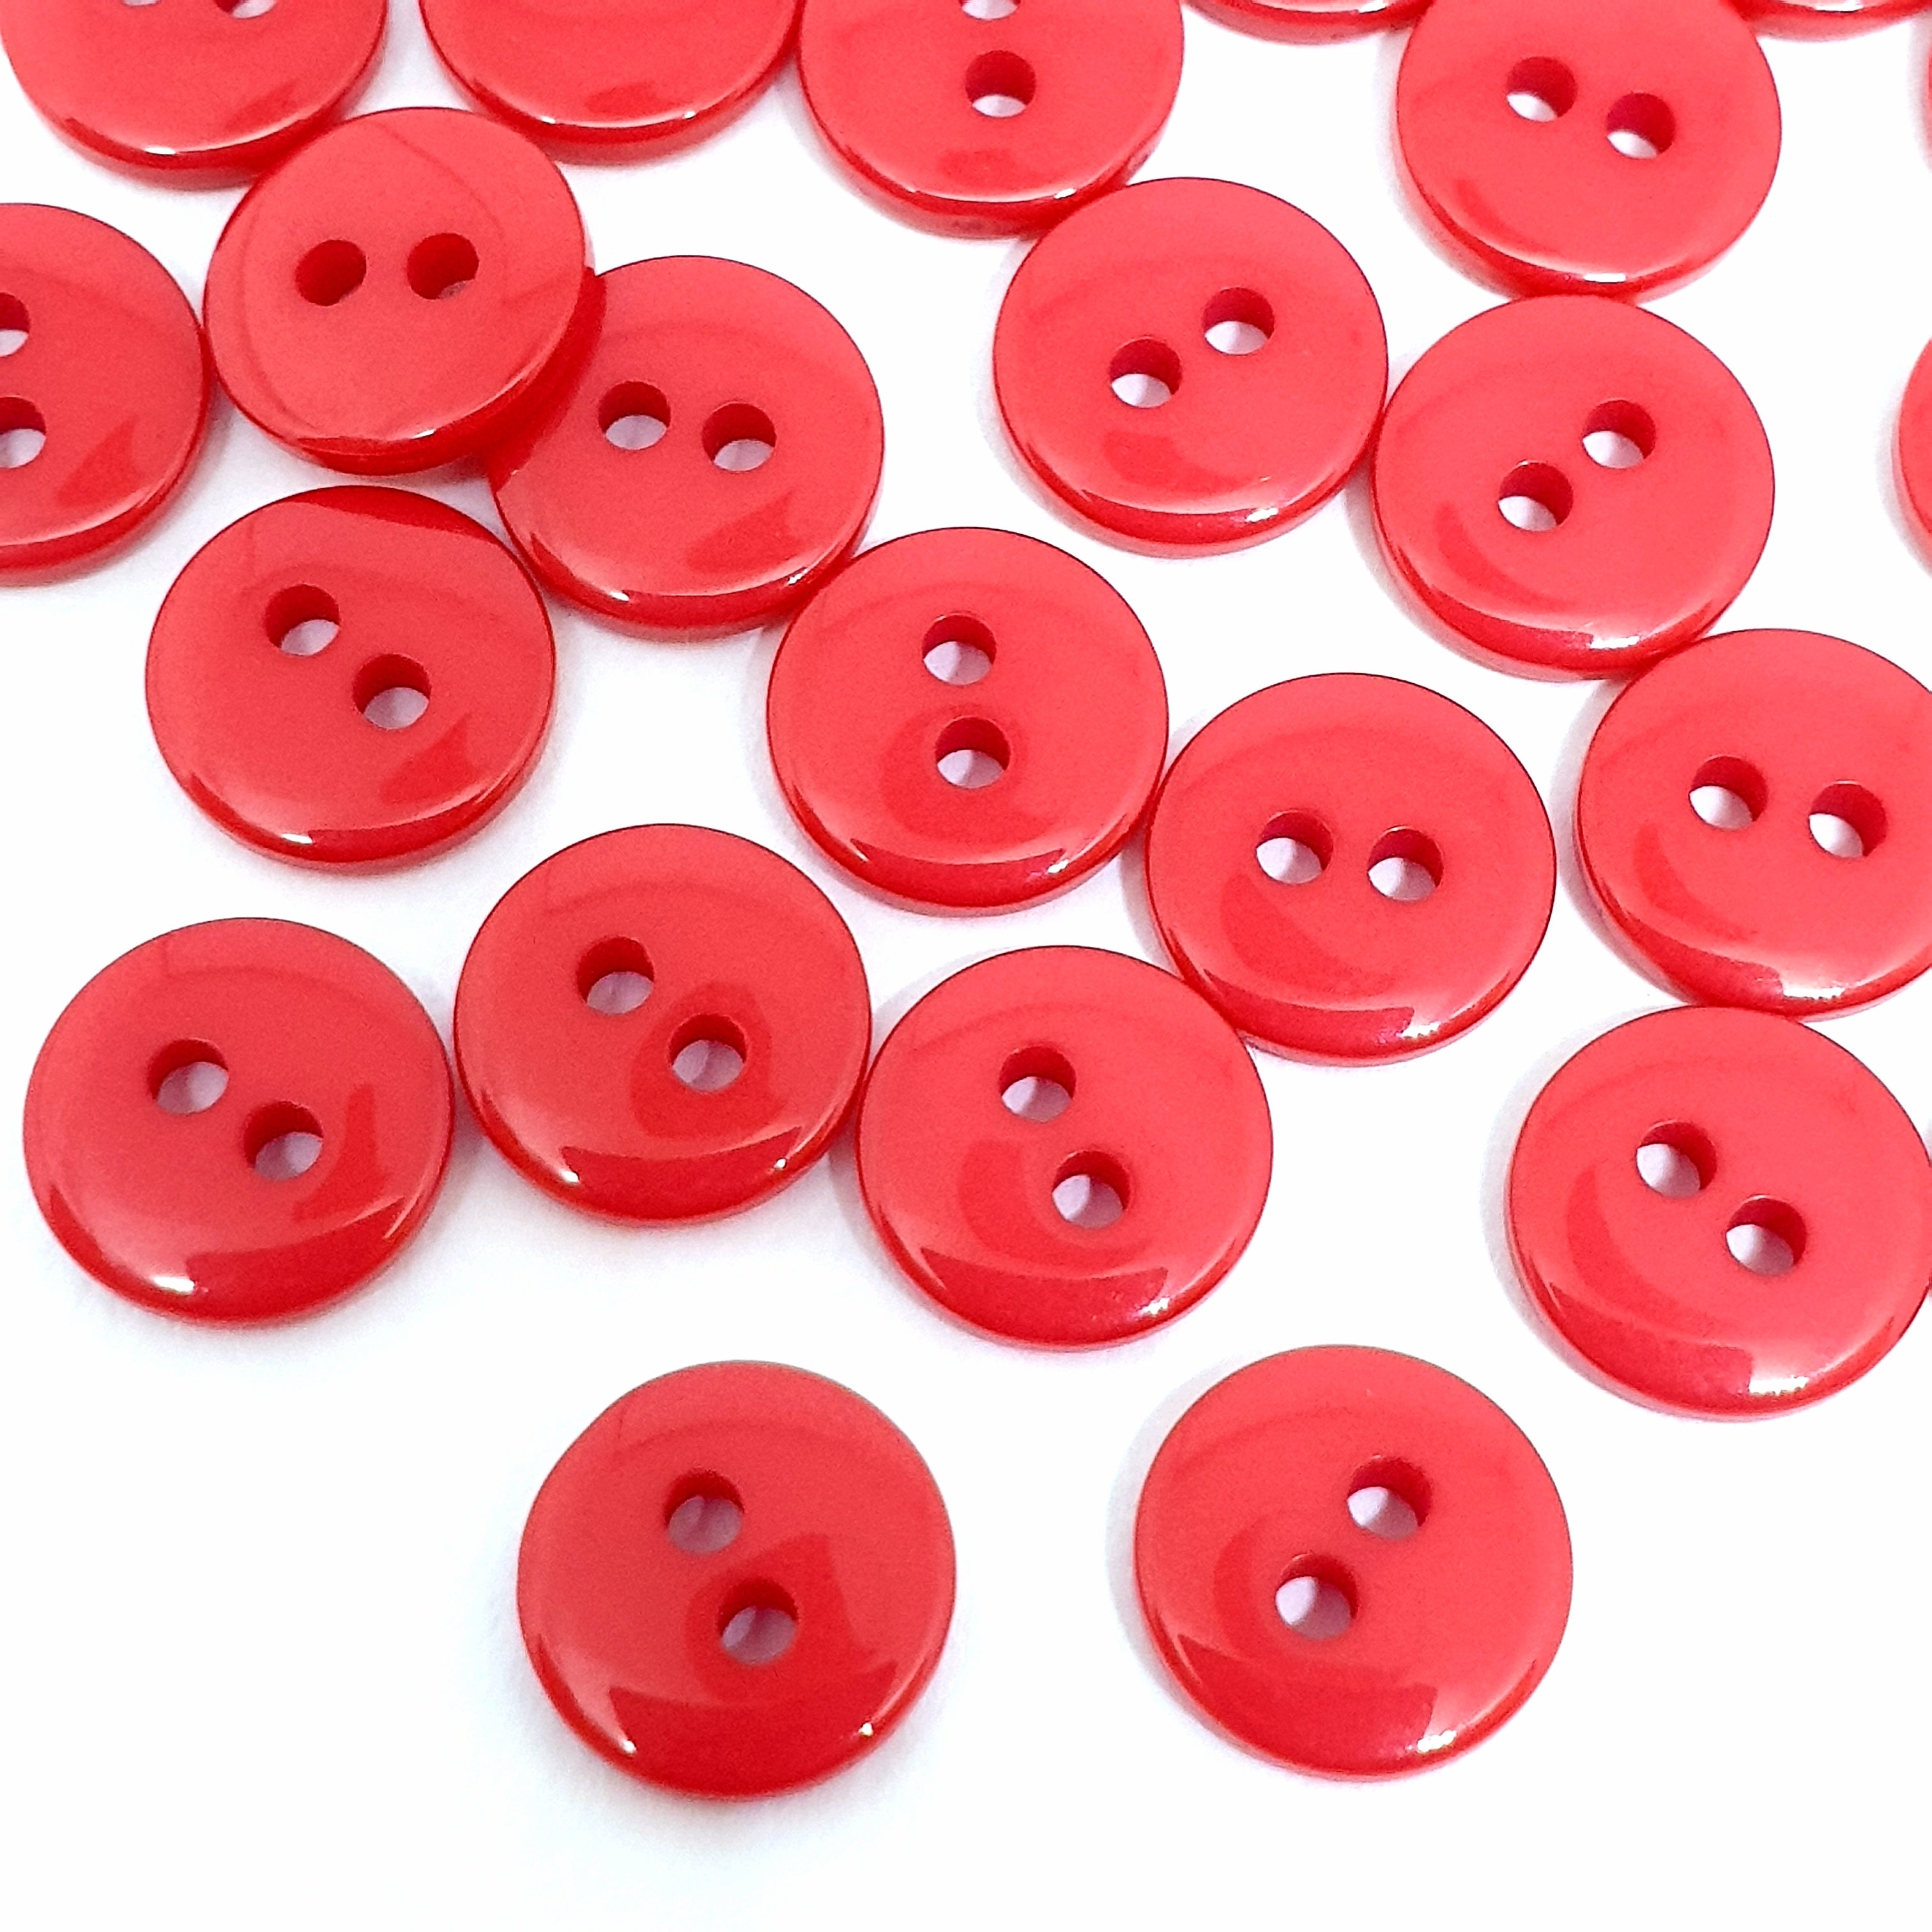 MajorCrafts 120pcs 10mm Red 2 Holes Small Round Resin Sewing Buttons B7